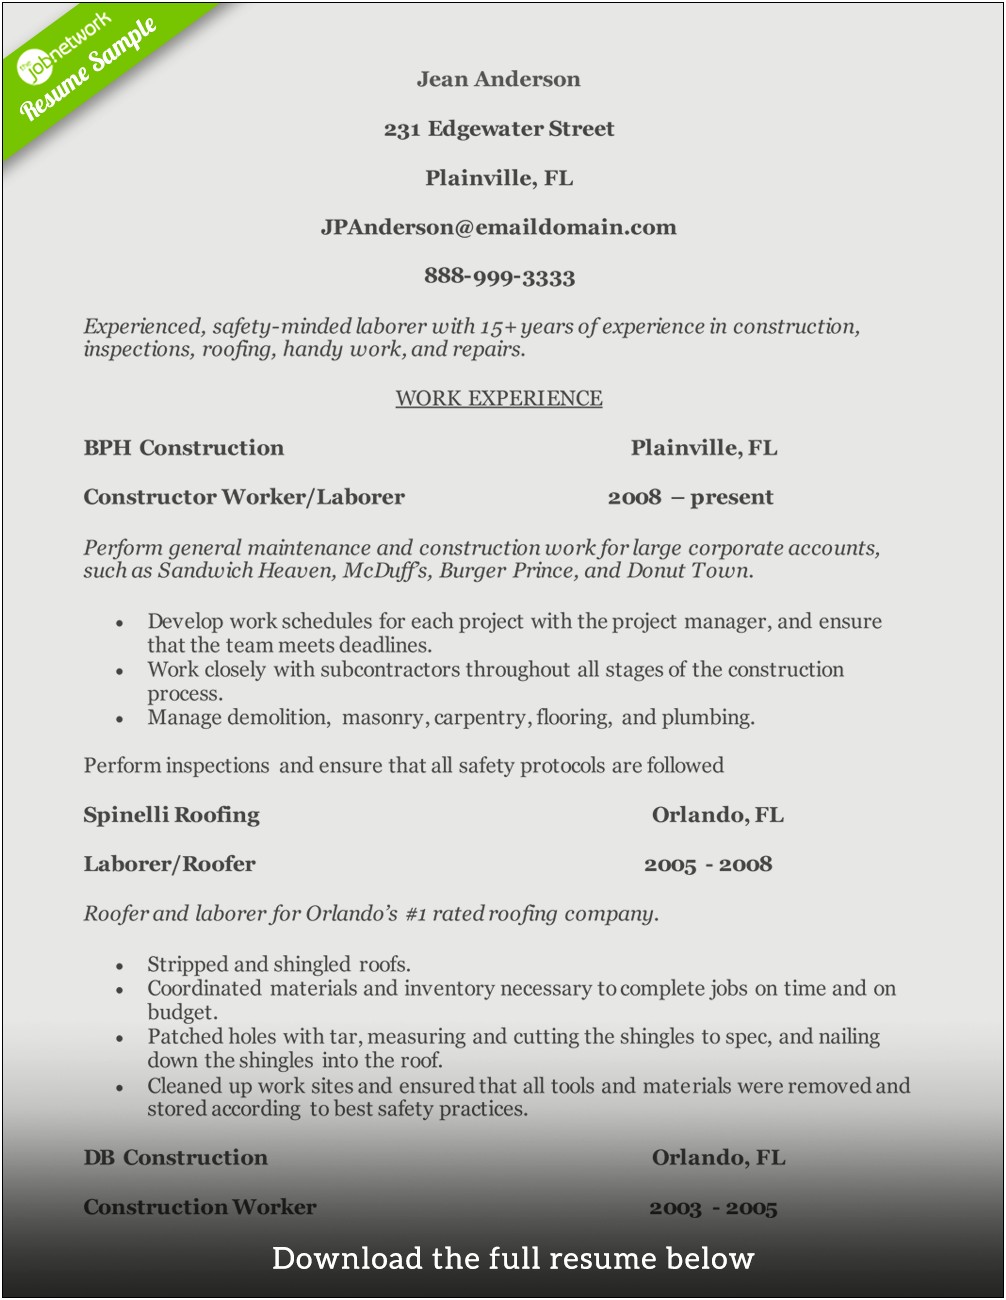 Resume Summary Examples For Construction